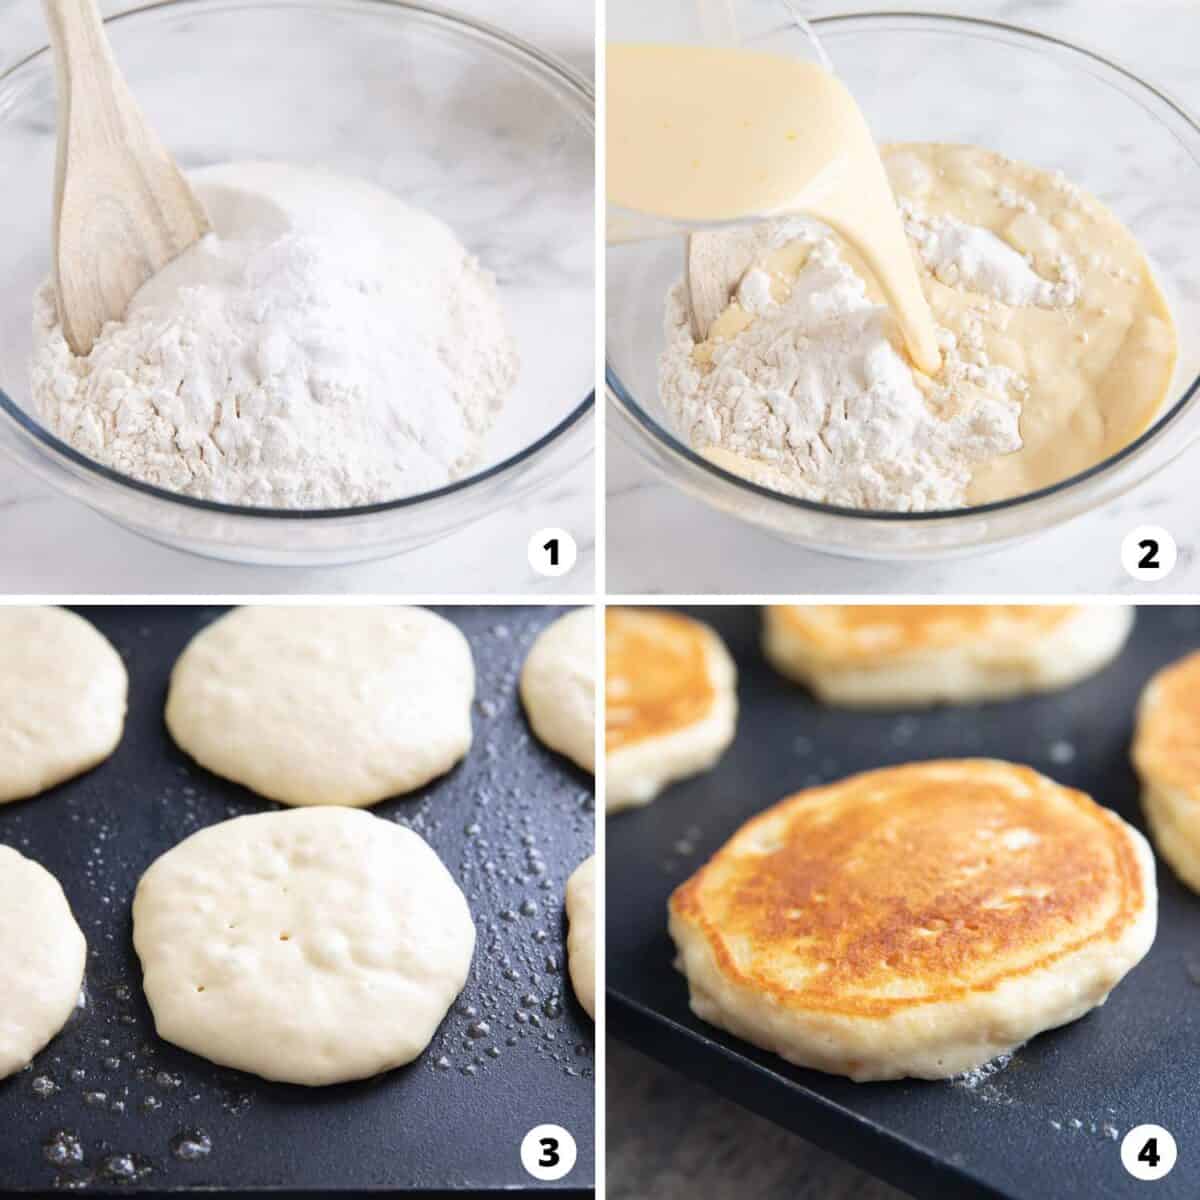 Showing how to make buttermilk pancakes in a 4 step collage.